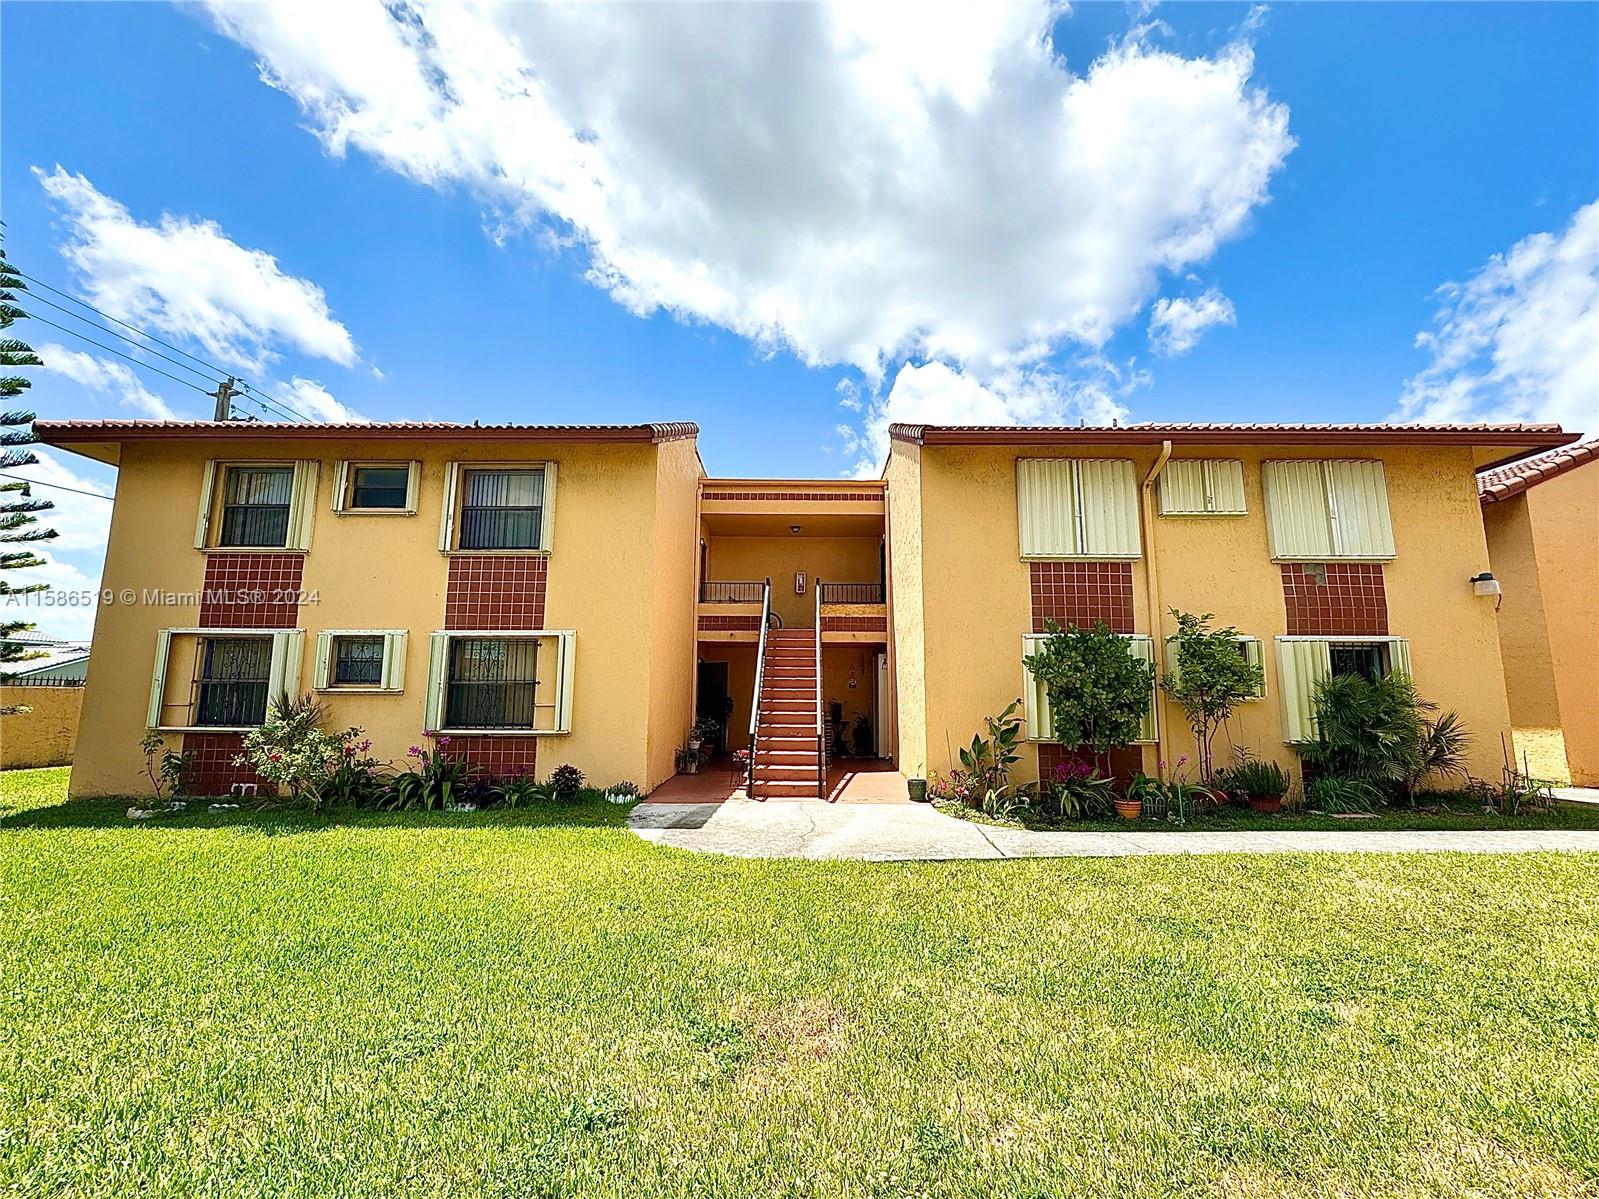 Property for Sale at 10893 Nw 7th St St 11-27, Miami, Broward County, Florida - Bedrooms: 3 
Bathrooms: 2  - $345,000